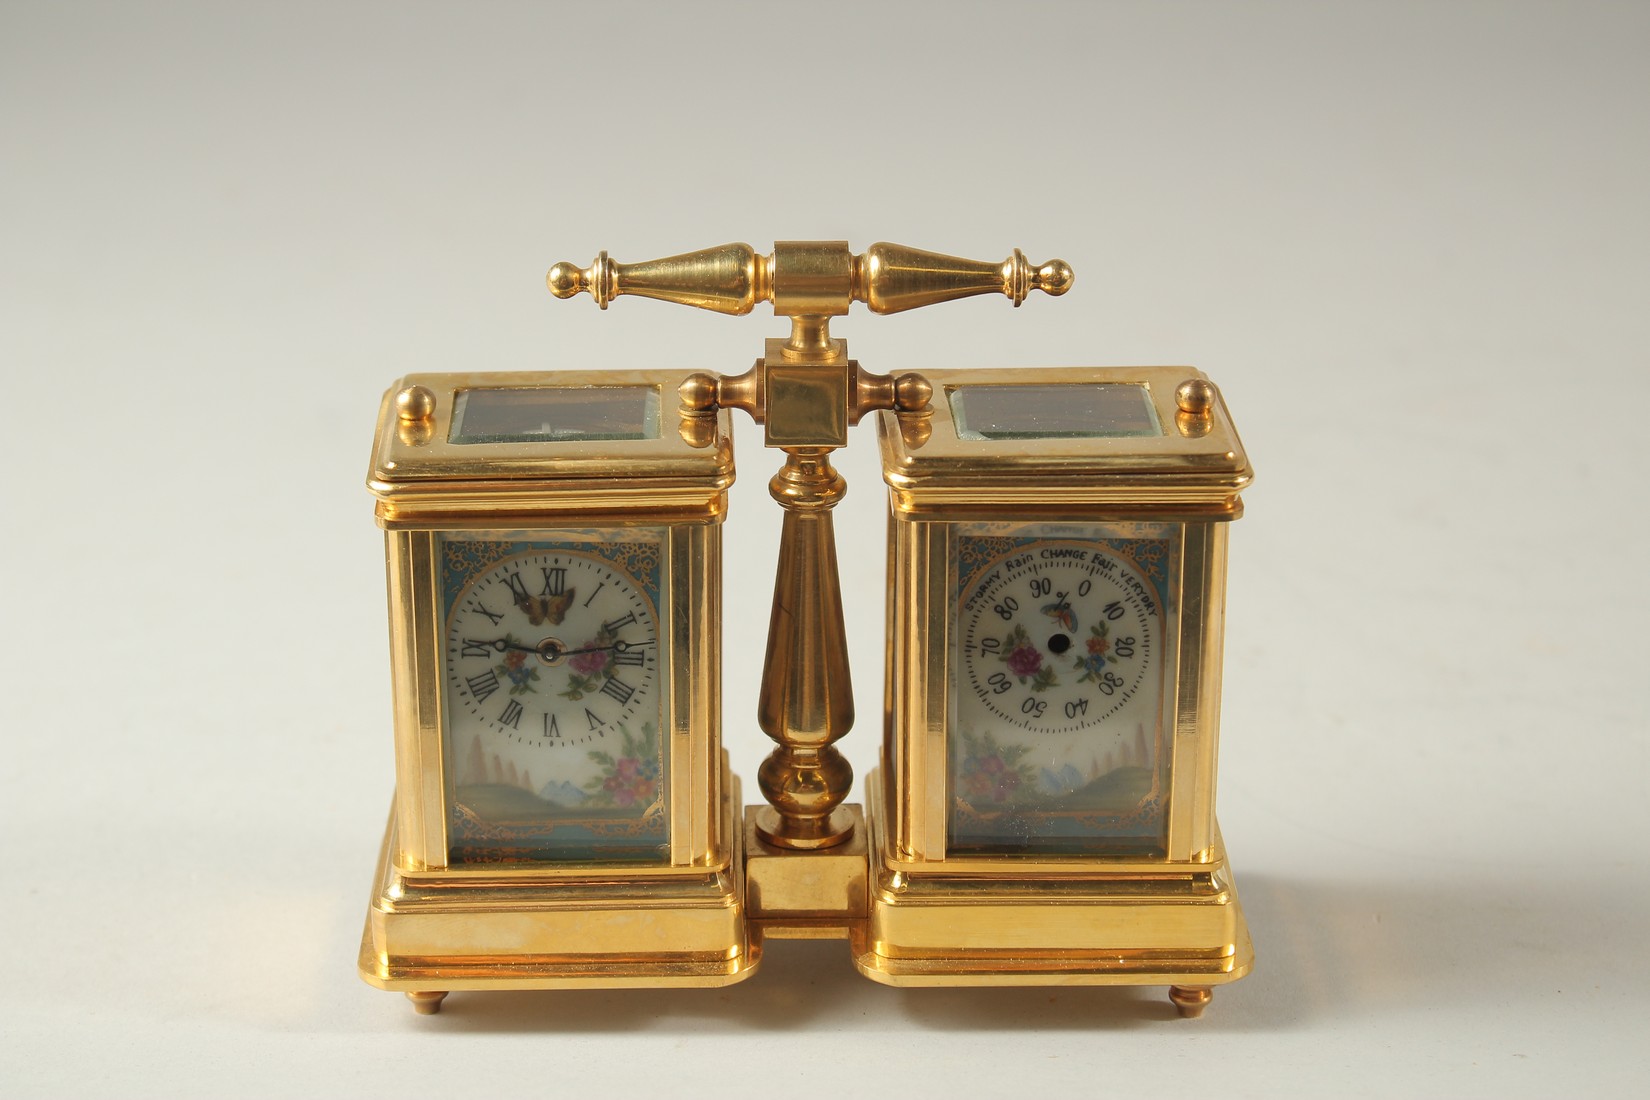 A SEVRES MODEL DOUBLE CARRIAGE CLOCK with porcelain panels and carrying handles. 10cms high.